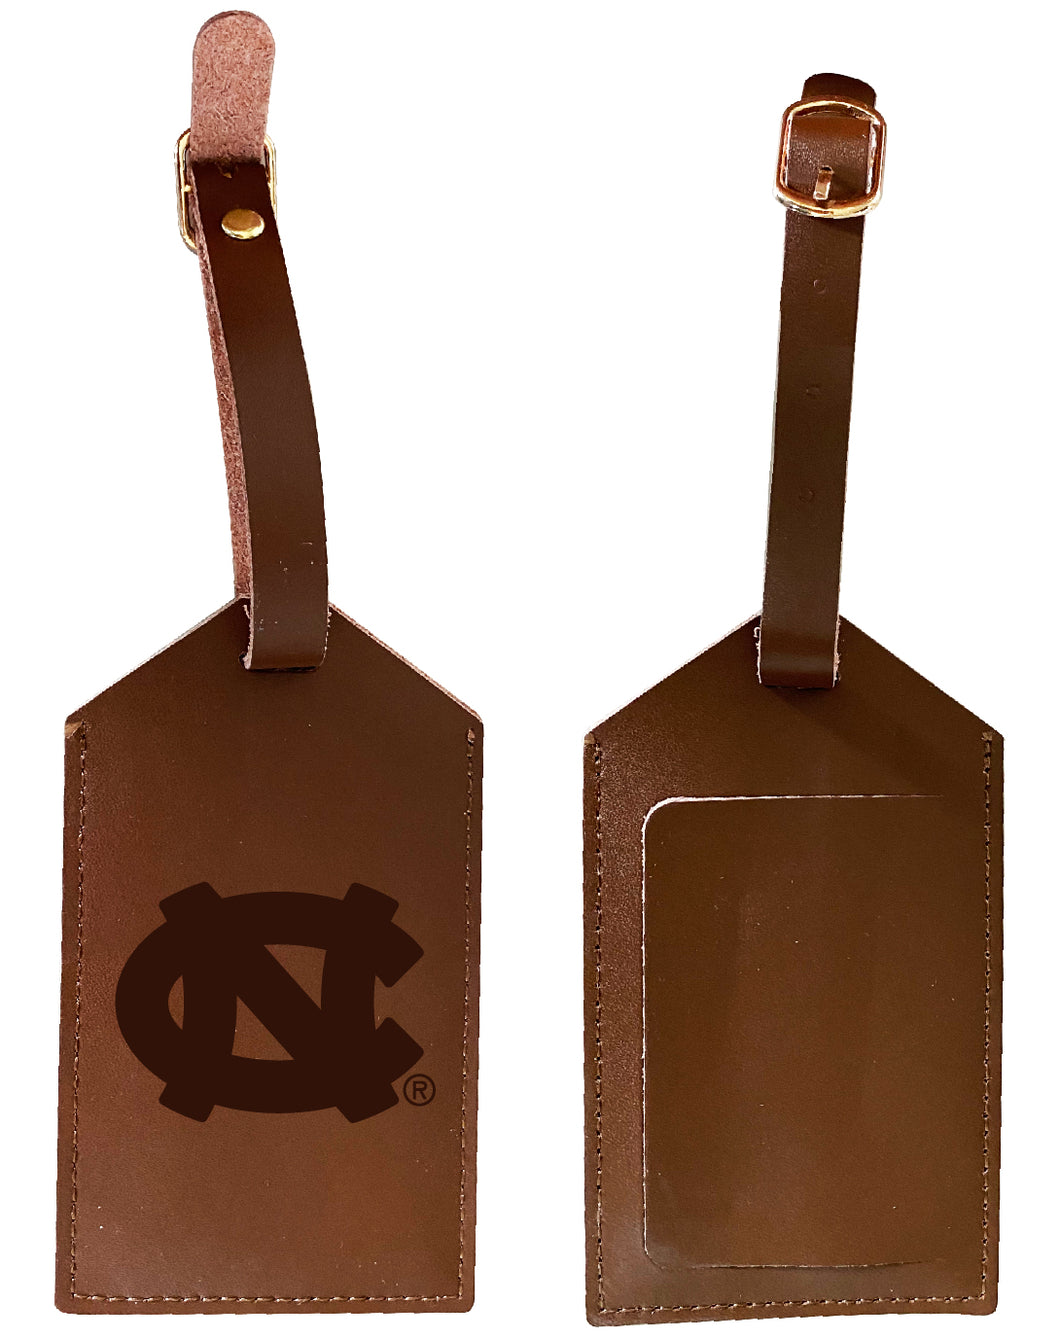 UNC Tar Heels Leather Luggage Tag Engraved